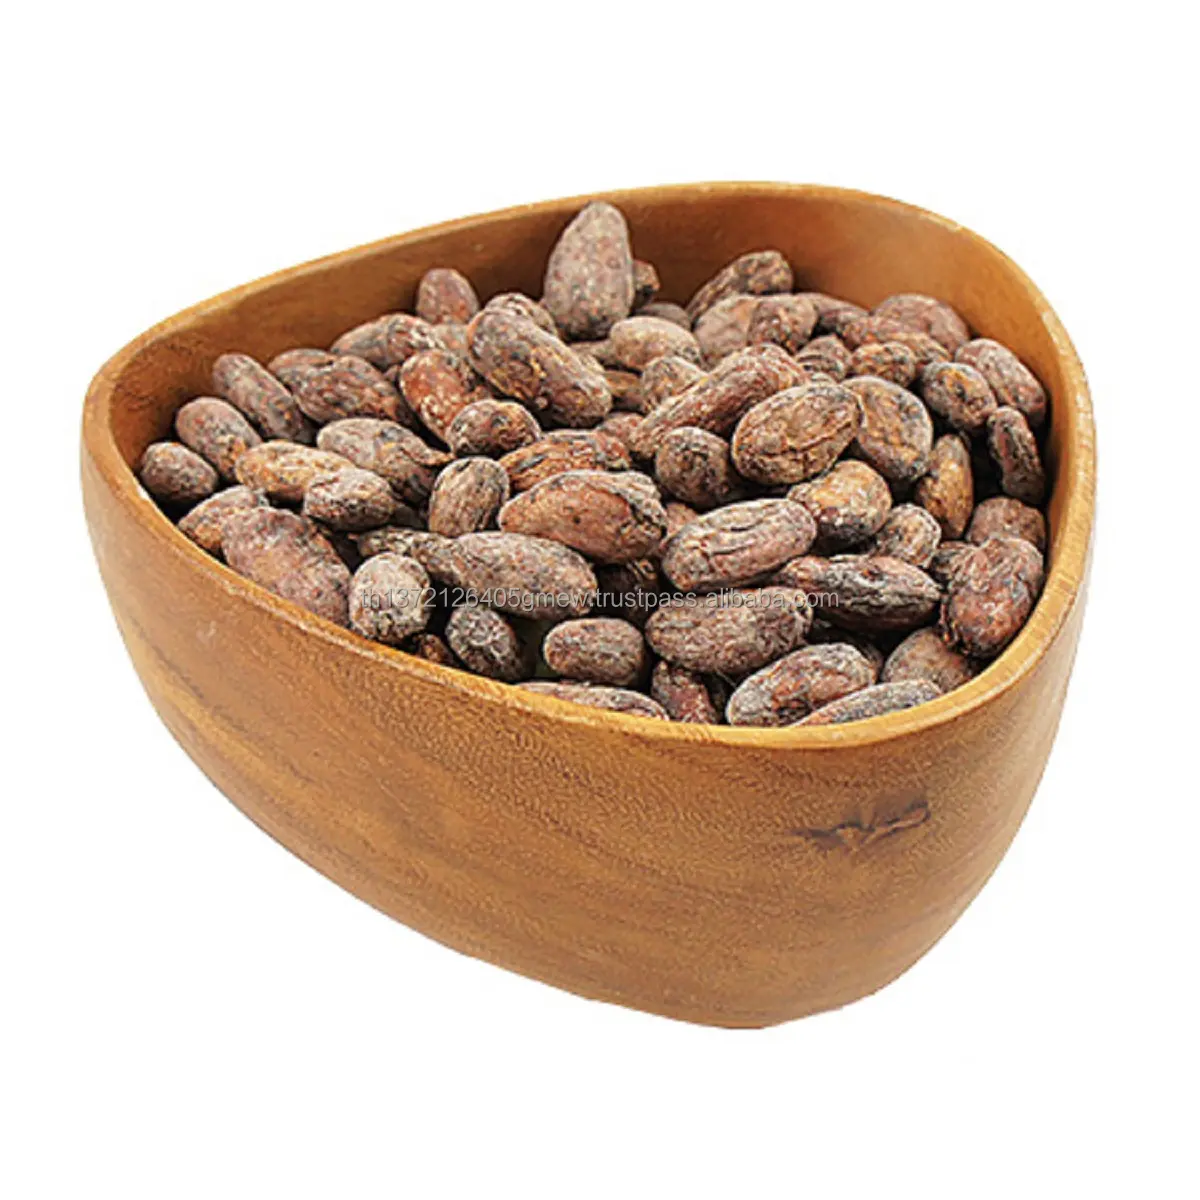 Buy Dried Cocoa Beans in 50kg bags, Organic Roasted Cacao Beans, Sun Dried Raw Cocoa Beans for Sale